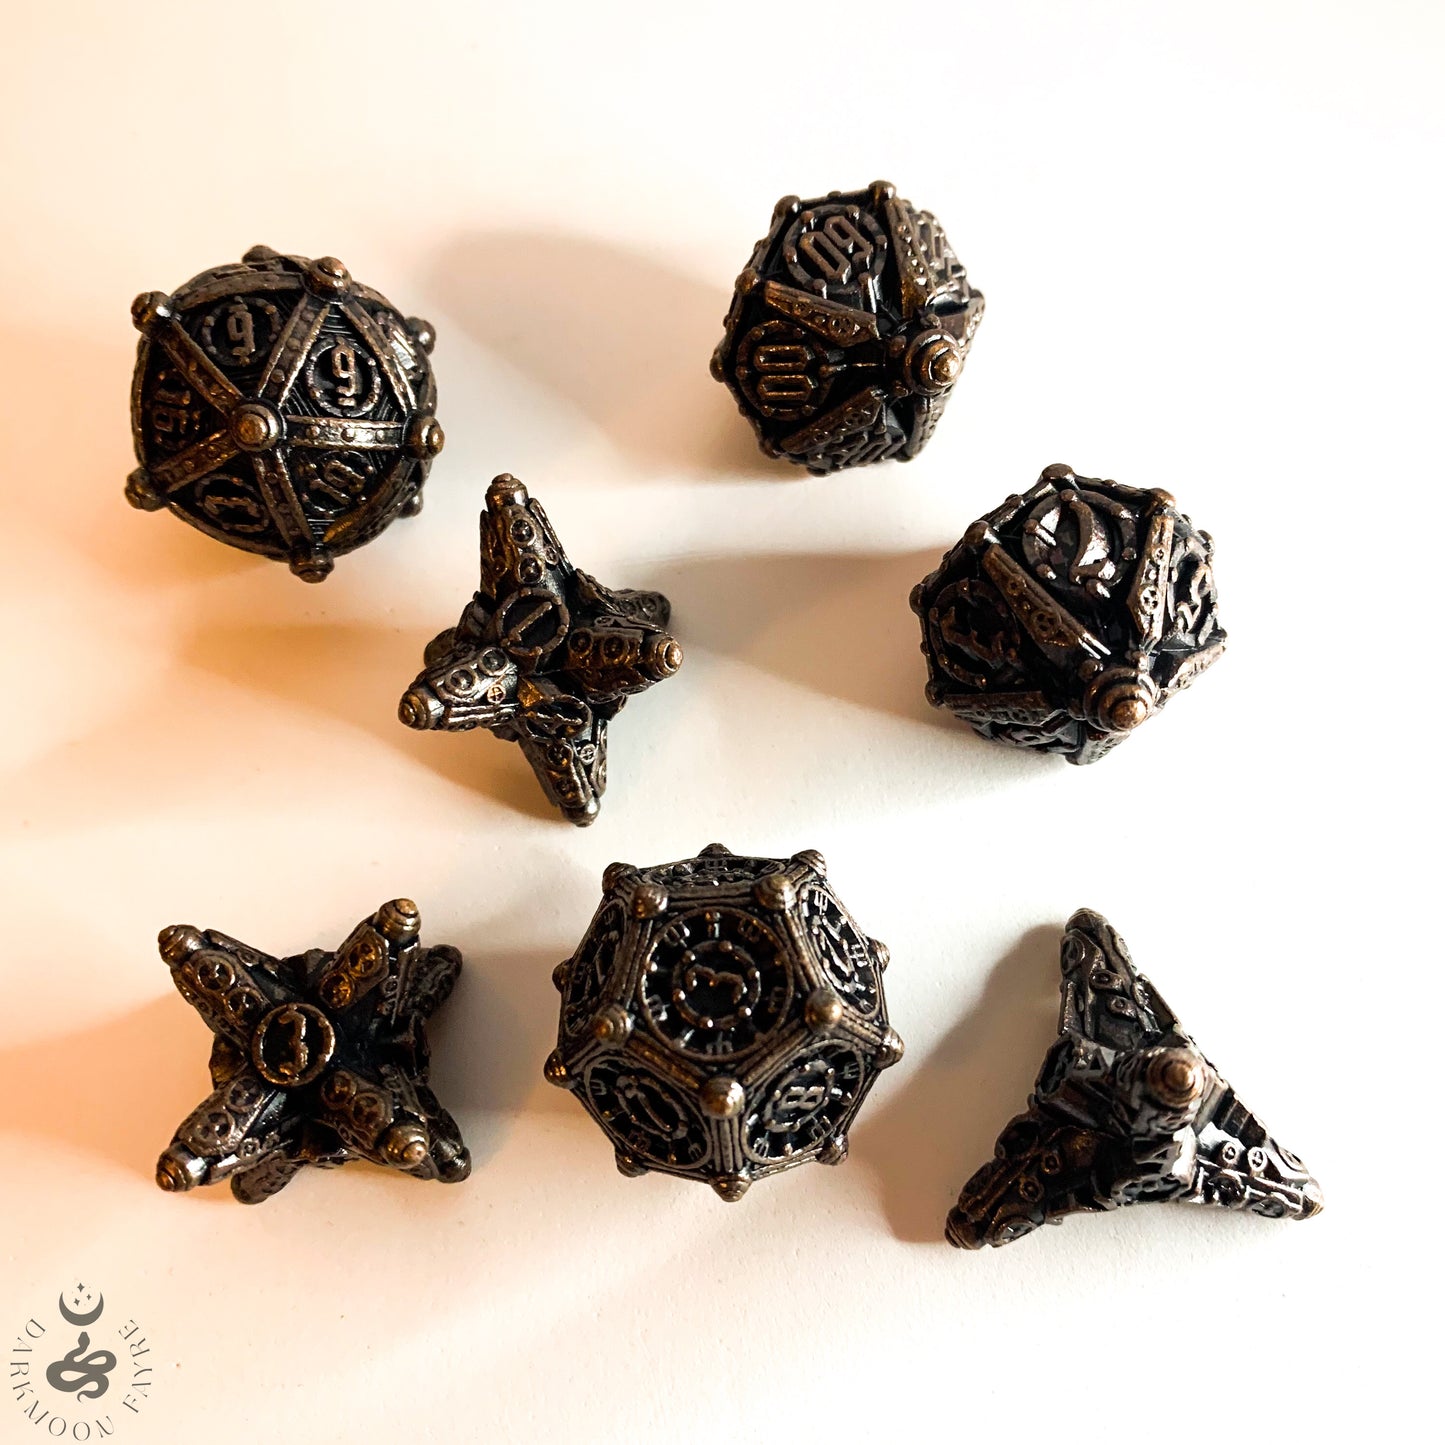 DnD 7 Copper Ancient Mechanical Solid Heavy Metal Polyhedral Dice Set With A Fairtrade Cotton Storage Pouch - Darkmoon Fayre